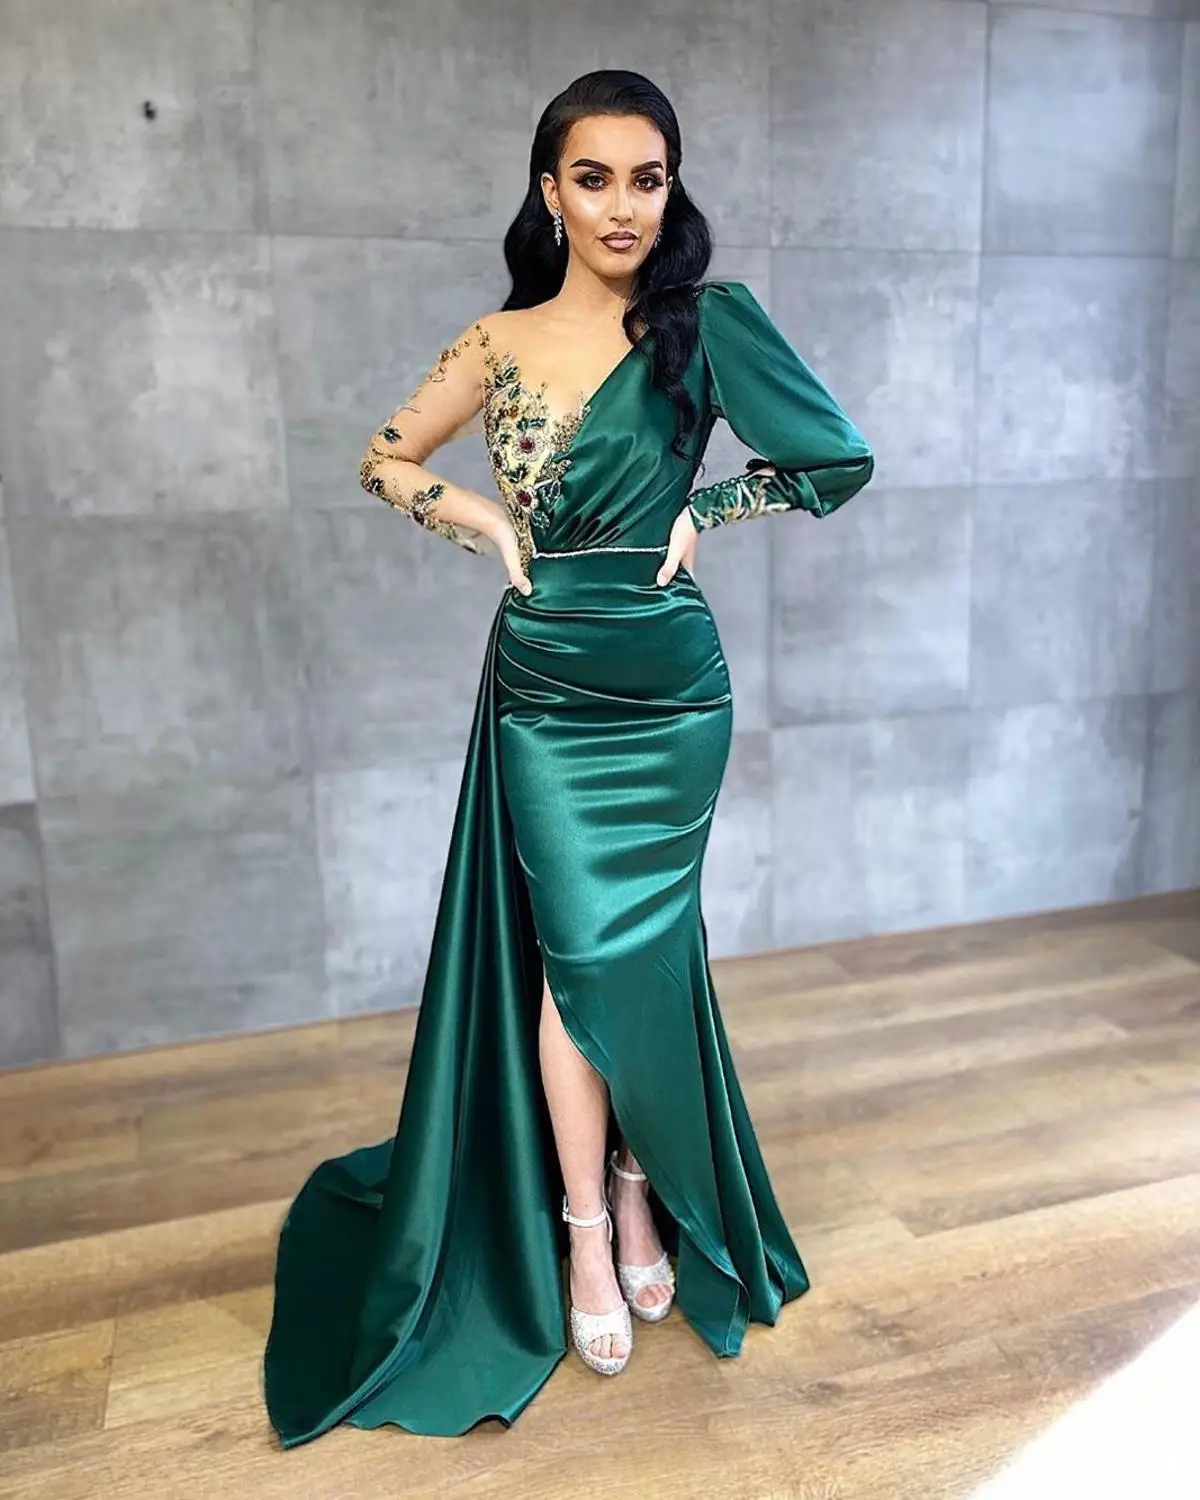 YUNUO Evening Dresses Long Sleeves Satin sukienka wieczorowa Formal Dress Embroidery Beading Prom Gowns Slit Sweep Train plus size evening gowns Evening Dresses